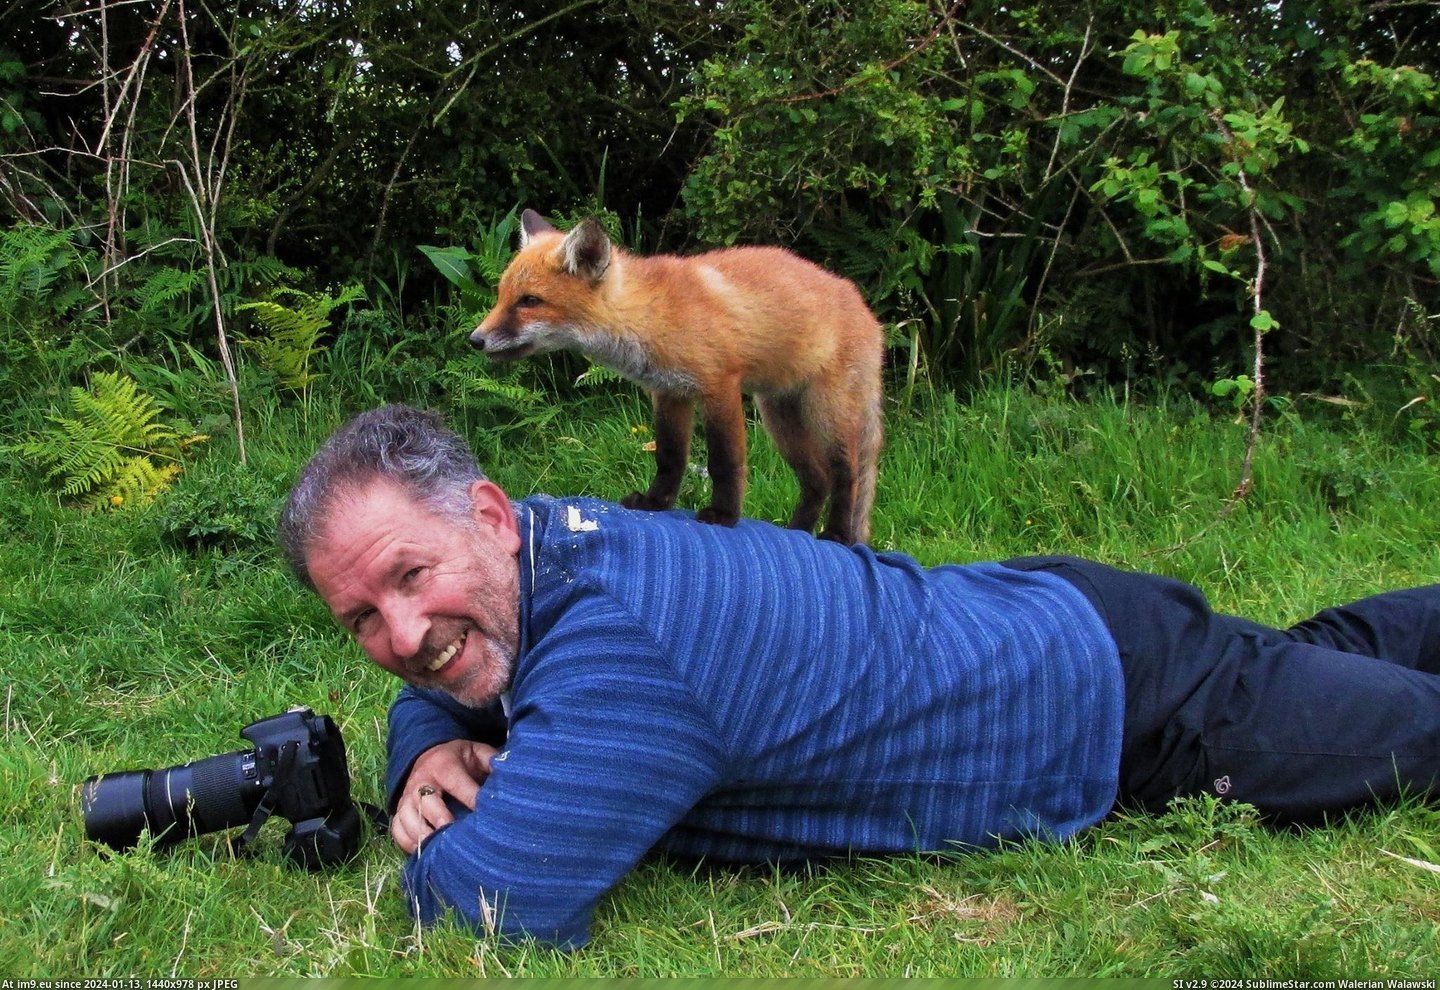 #Dad #Wild #Fox #Appeared #Cub #Suddenly #Photography #Wildlife [Pics] Doing some wildlife photography with my dad when suddenly, a wild fox cub appeared! Pic. (Image of album My r/PICS favs))